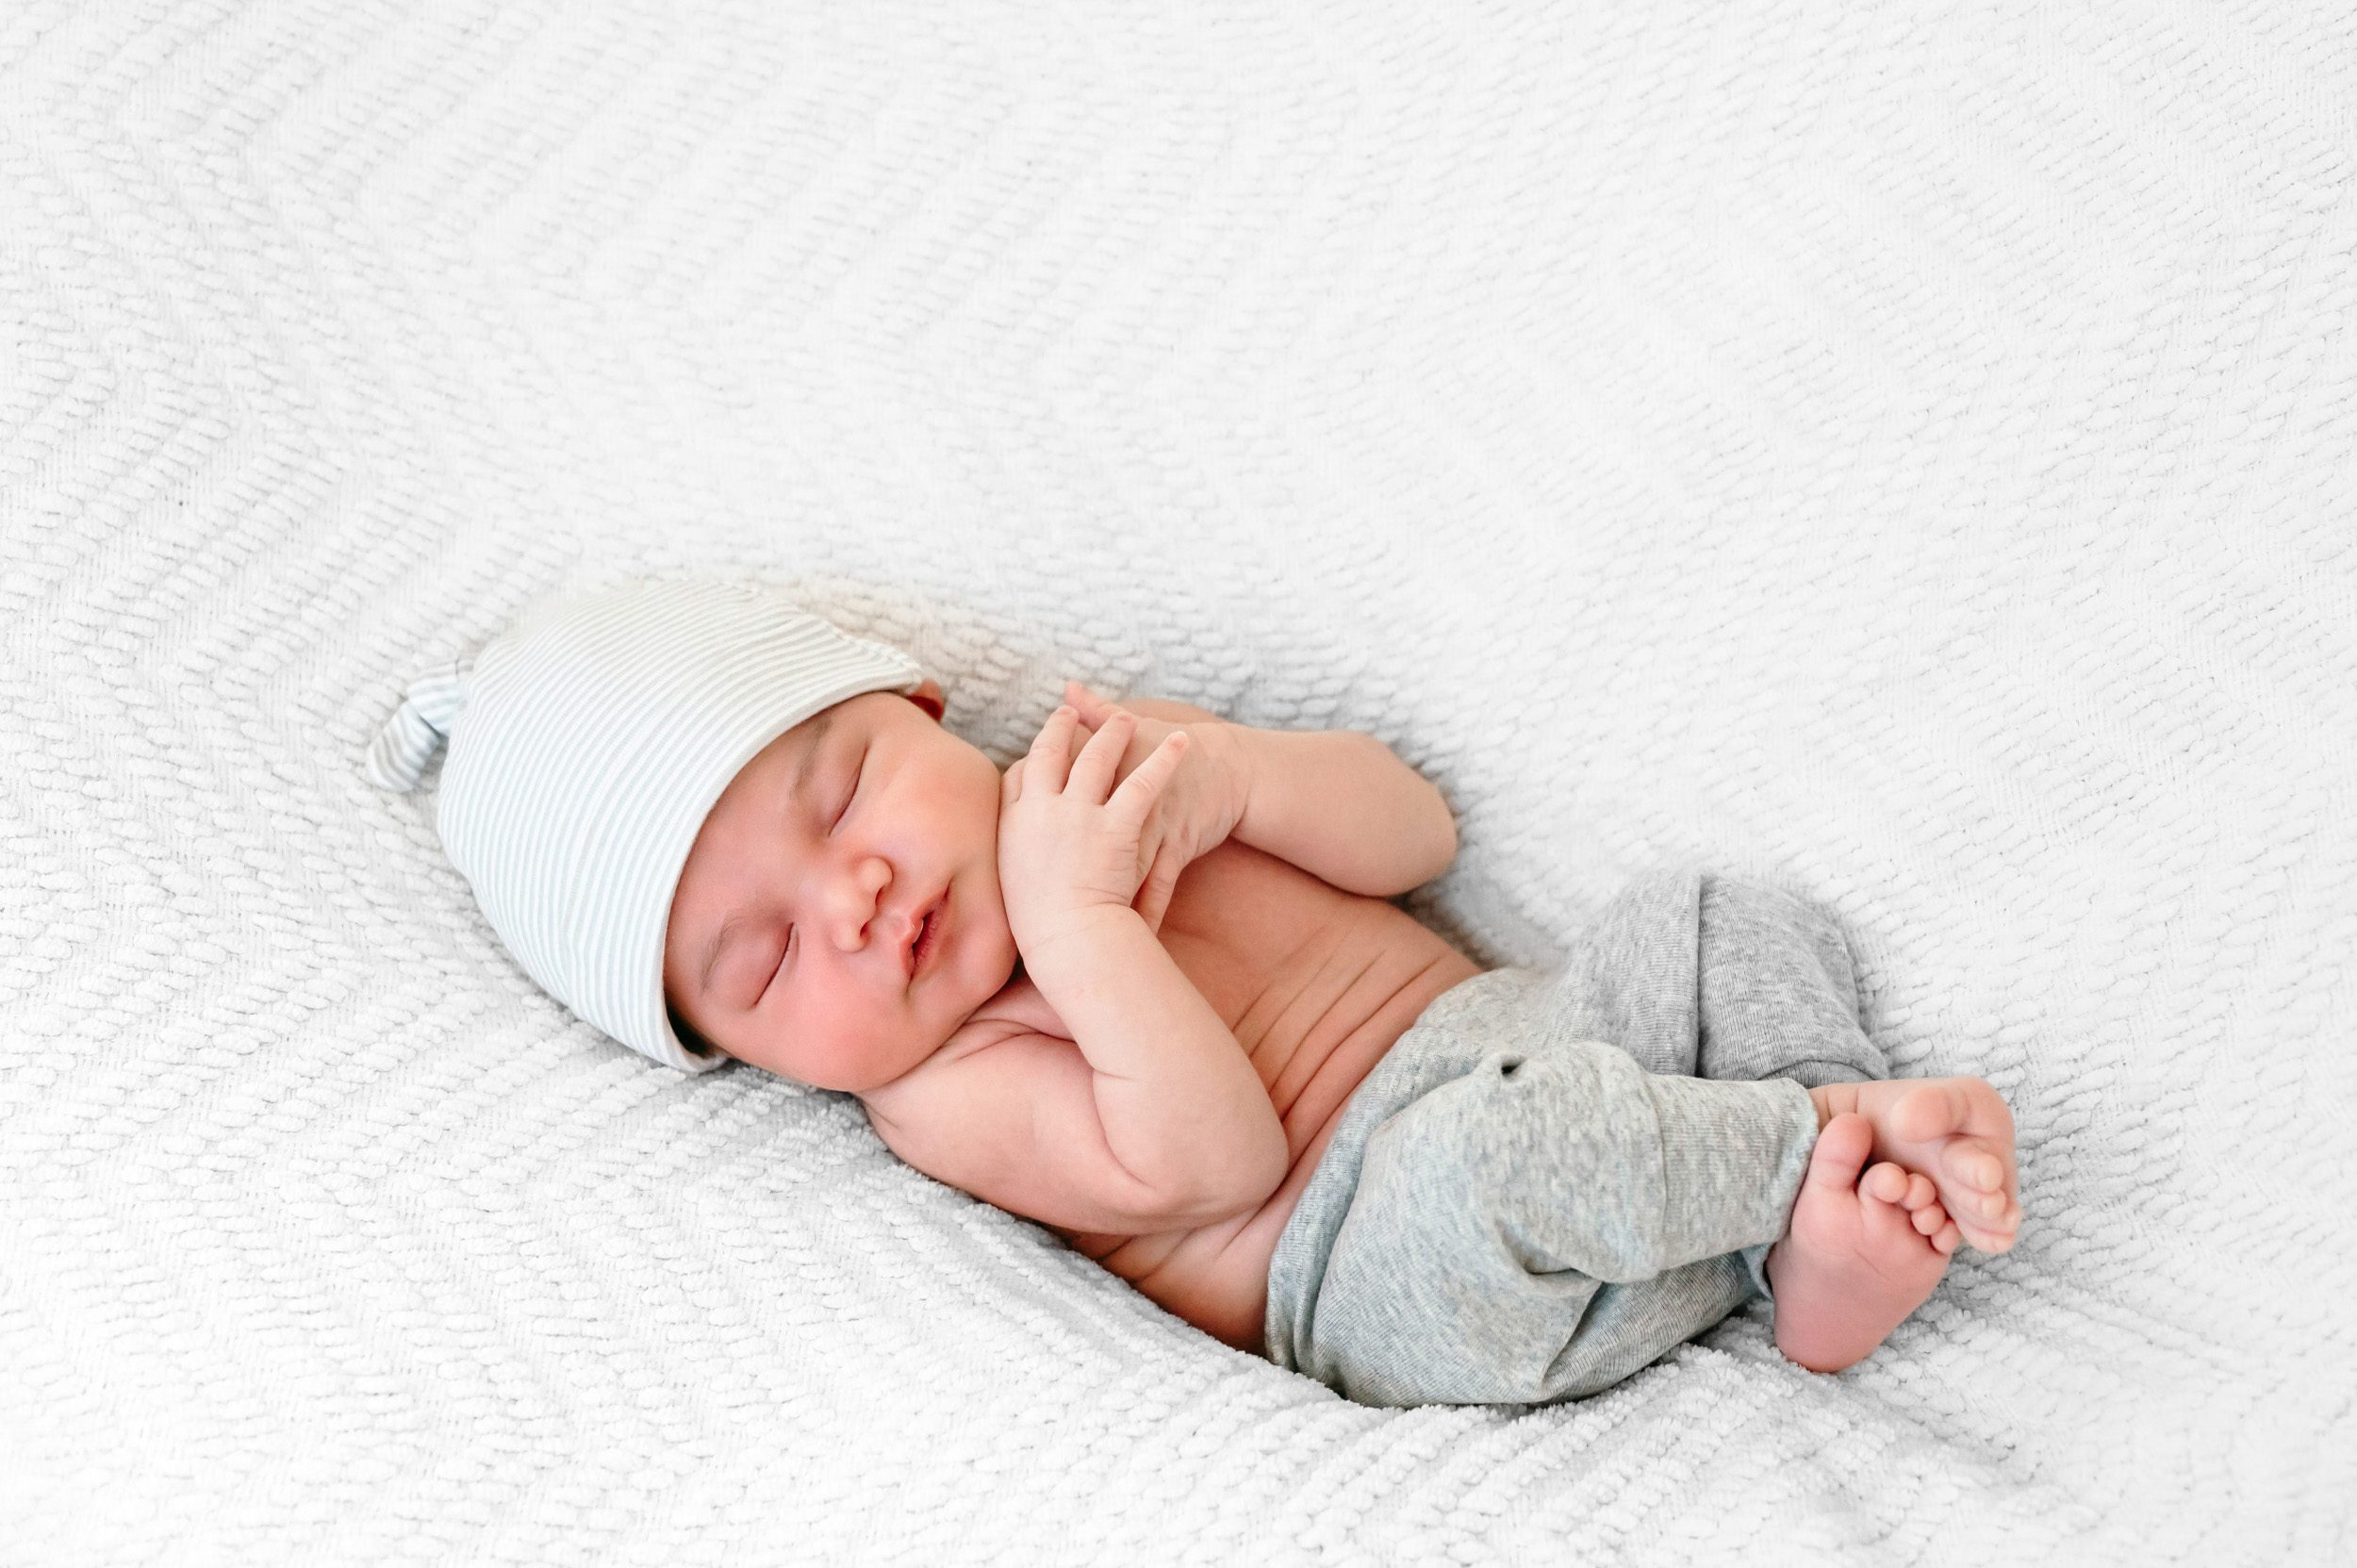 Newborn picture of a sleeping baby boy with his arms and legs tucked in close to his body during a reading newborn photo session